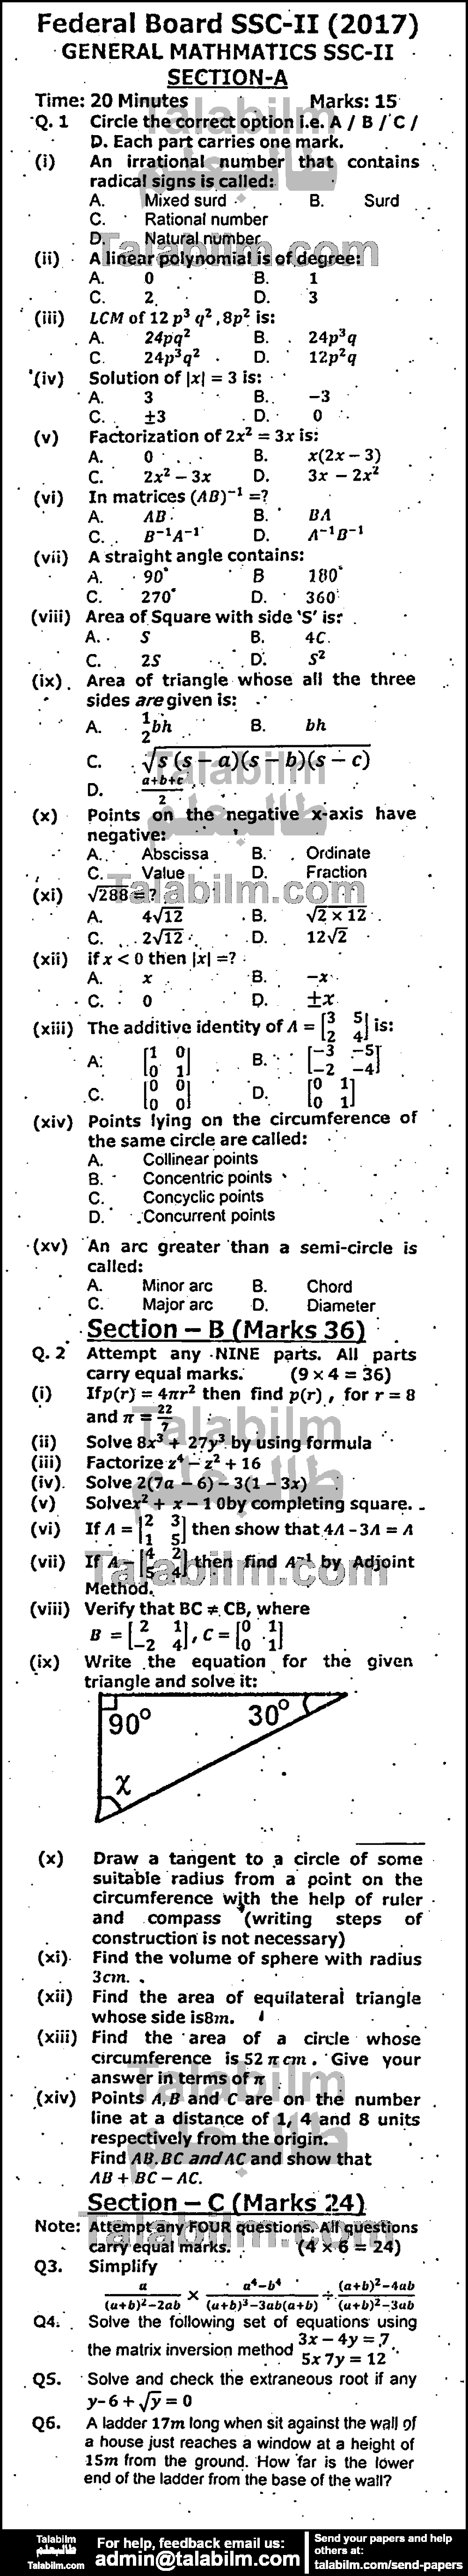 General Math 0 past paper for 2017 Group-I